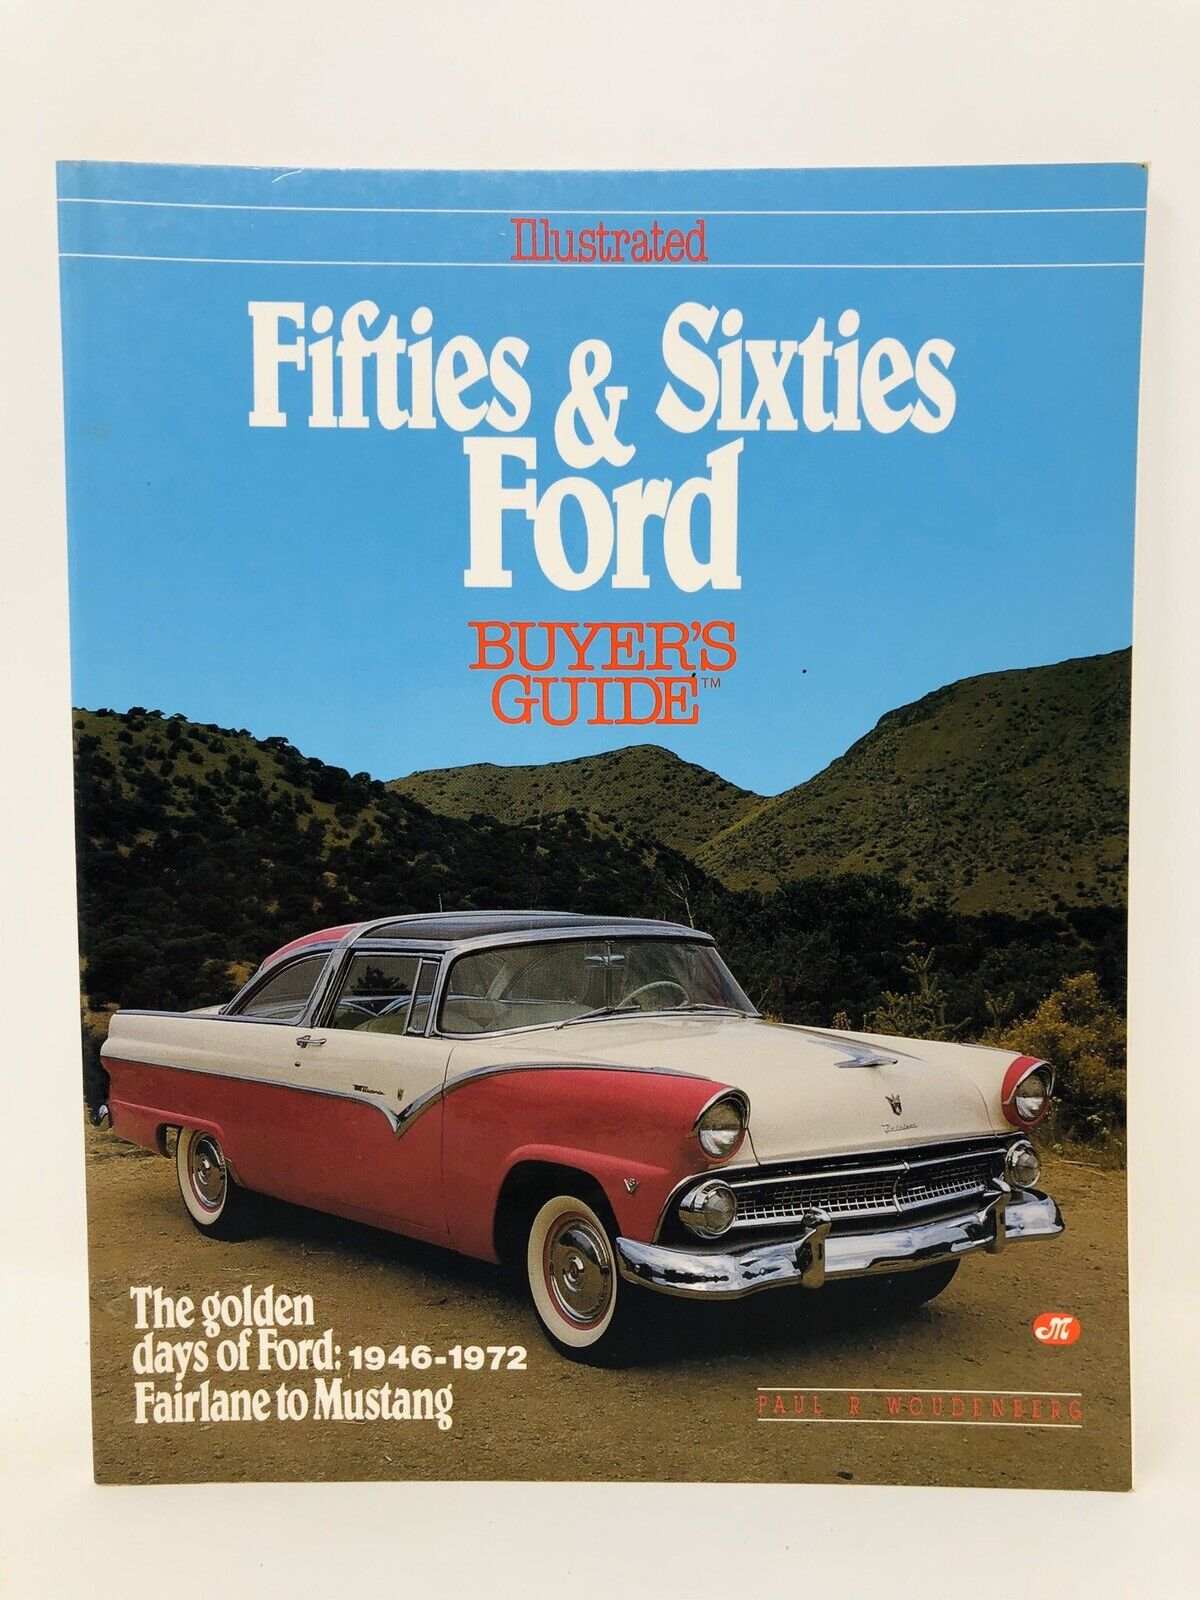 1946-1972 FIFTIES AND SIXTIES FORDS BUYERS GUIDE MUSTANG FAIRLANE VICTORIA HH21